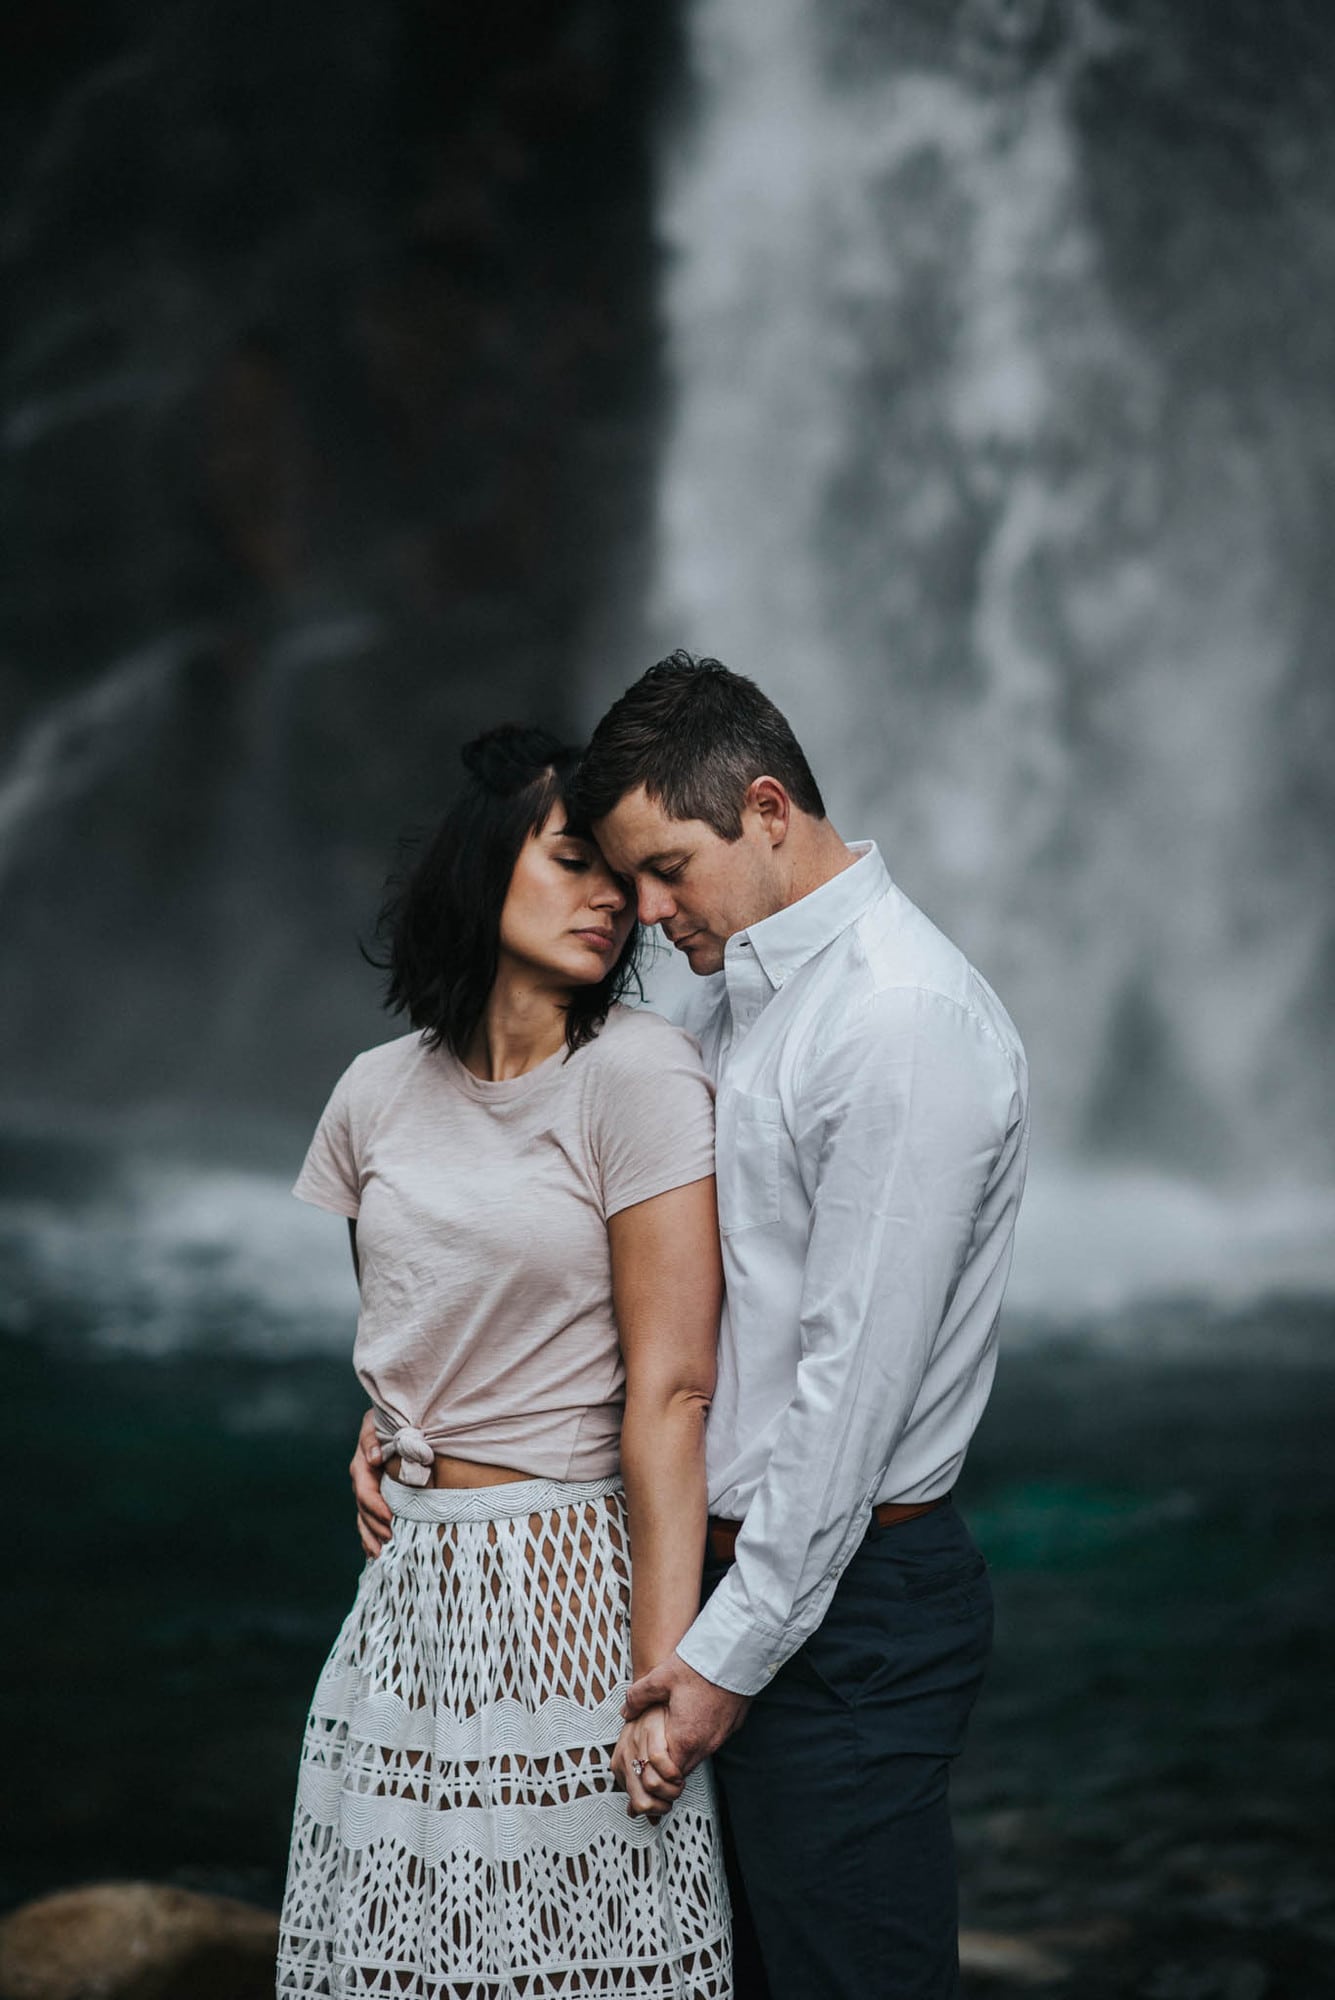 here is a photo of a sweet couple's engagement photos at franklin falls in snoqualmie pass washington